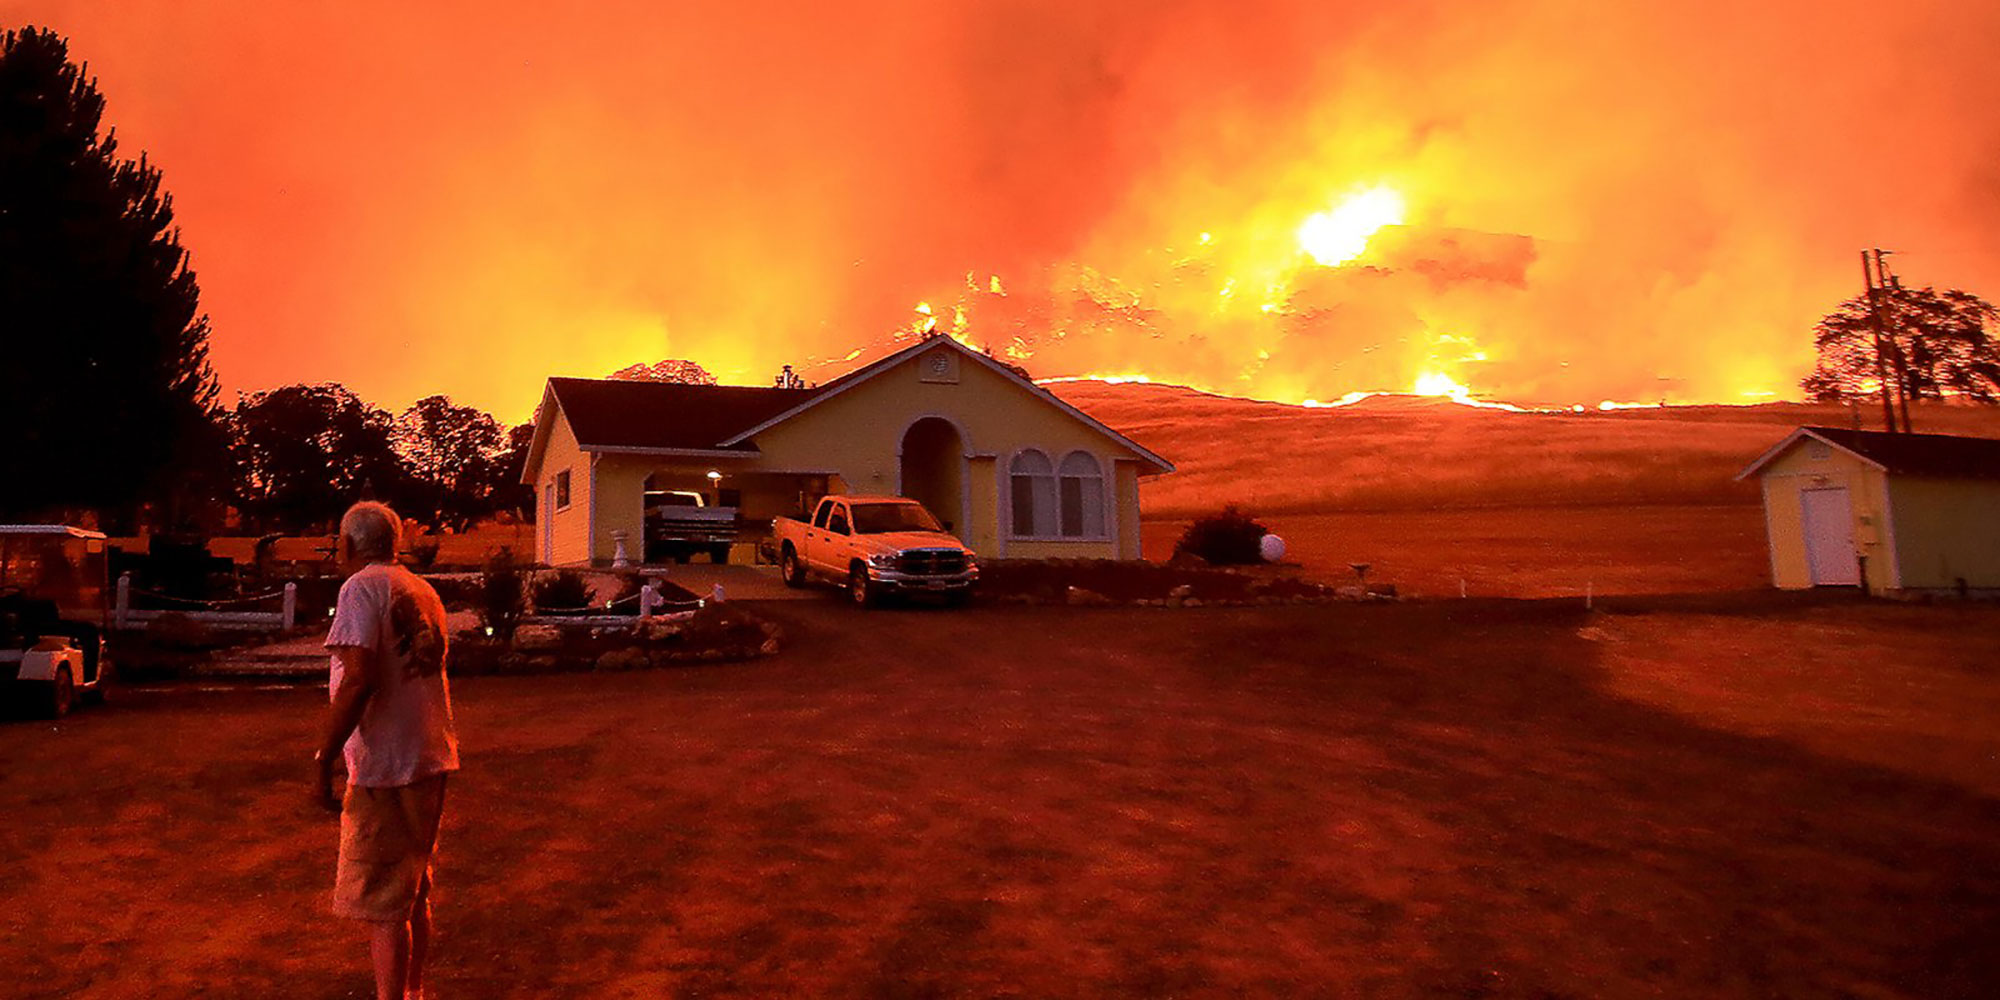 man in front of house with wildfire in surrounding landscape